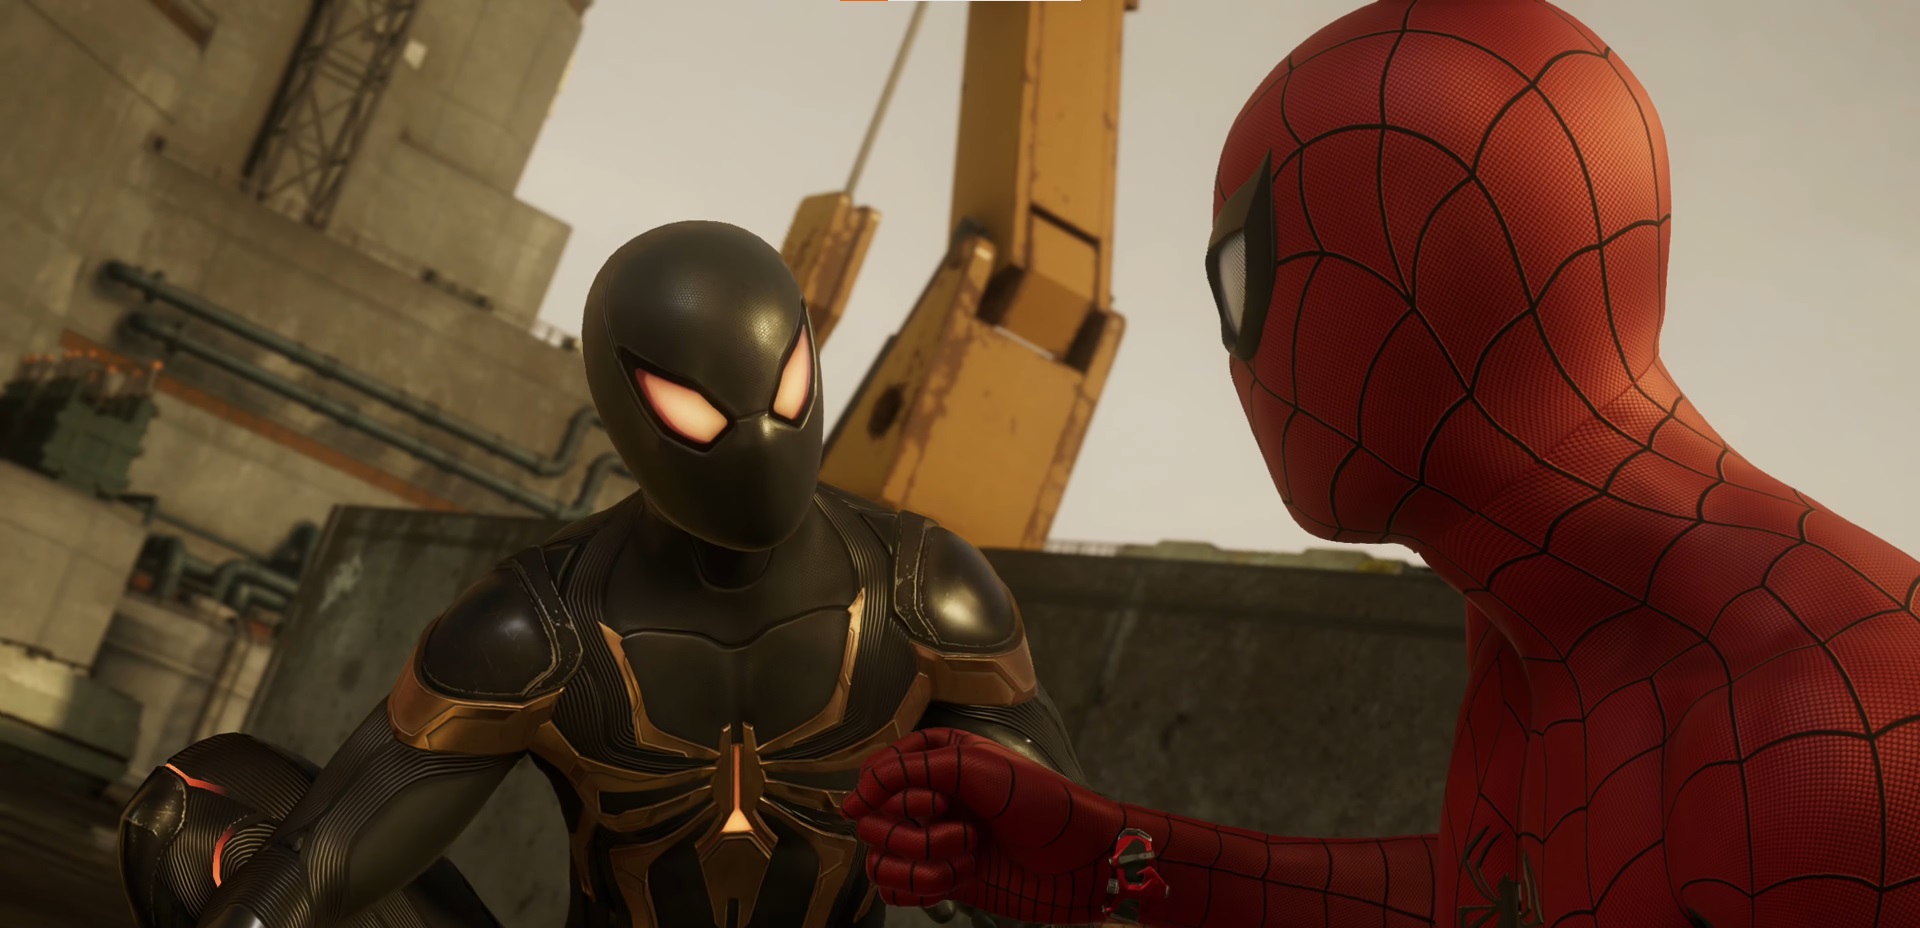 Is Marvel's Spider-Man 2 coming to Xbox or PC? - Answered